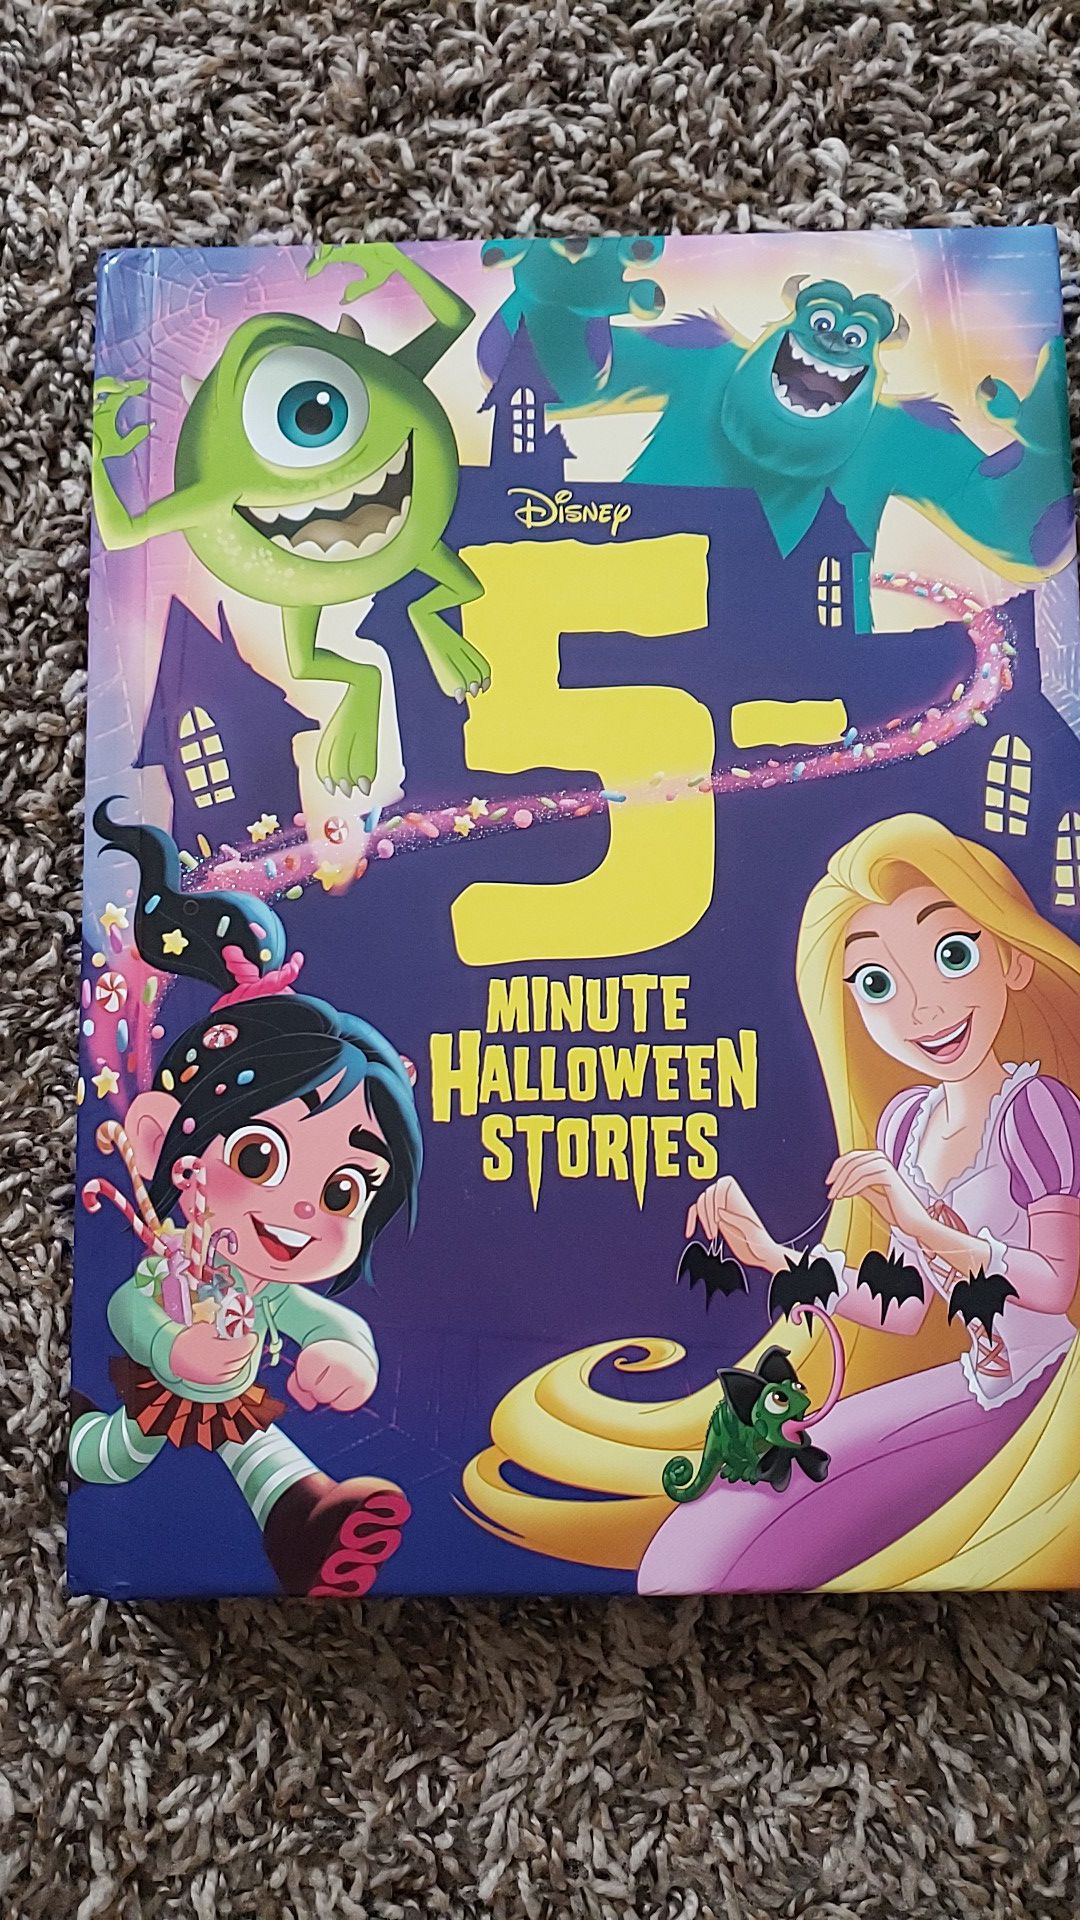 Halloween stories book 173 pages